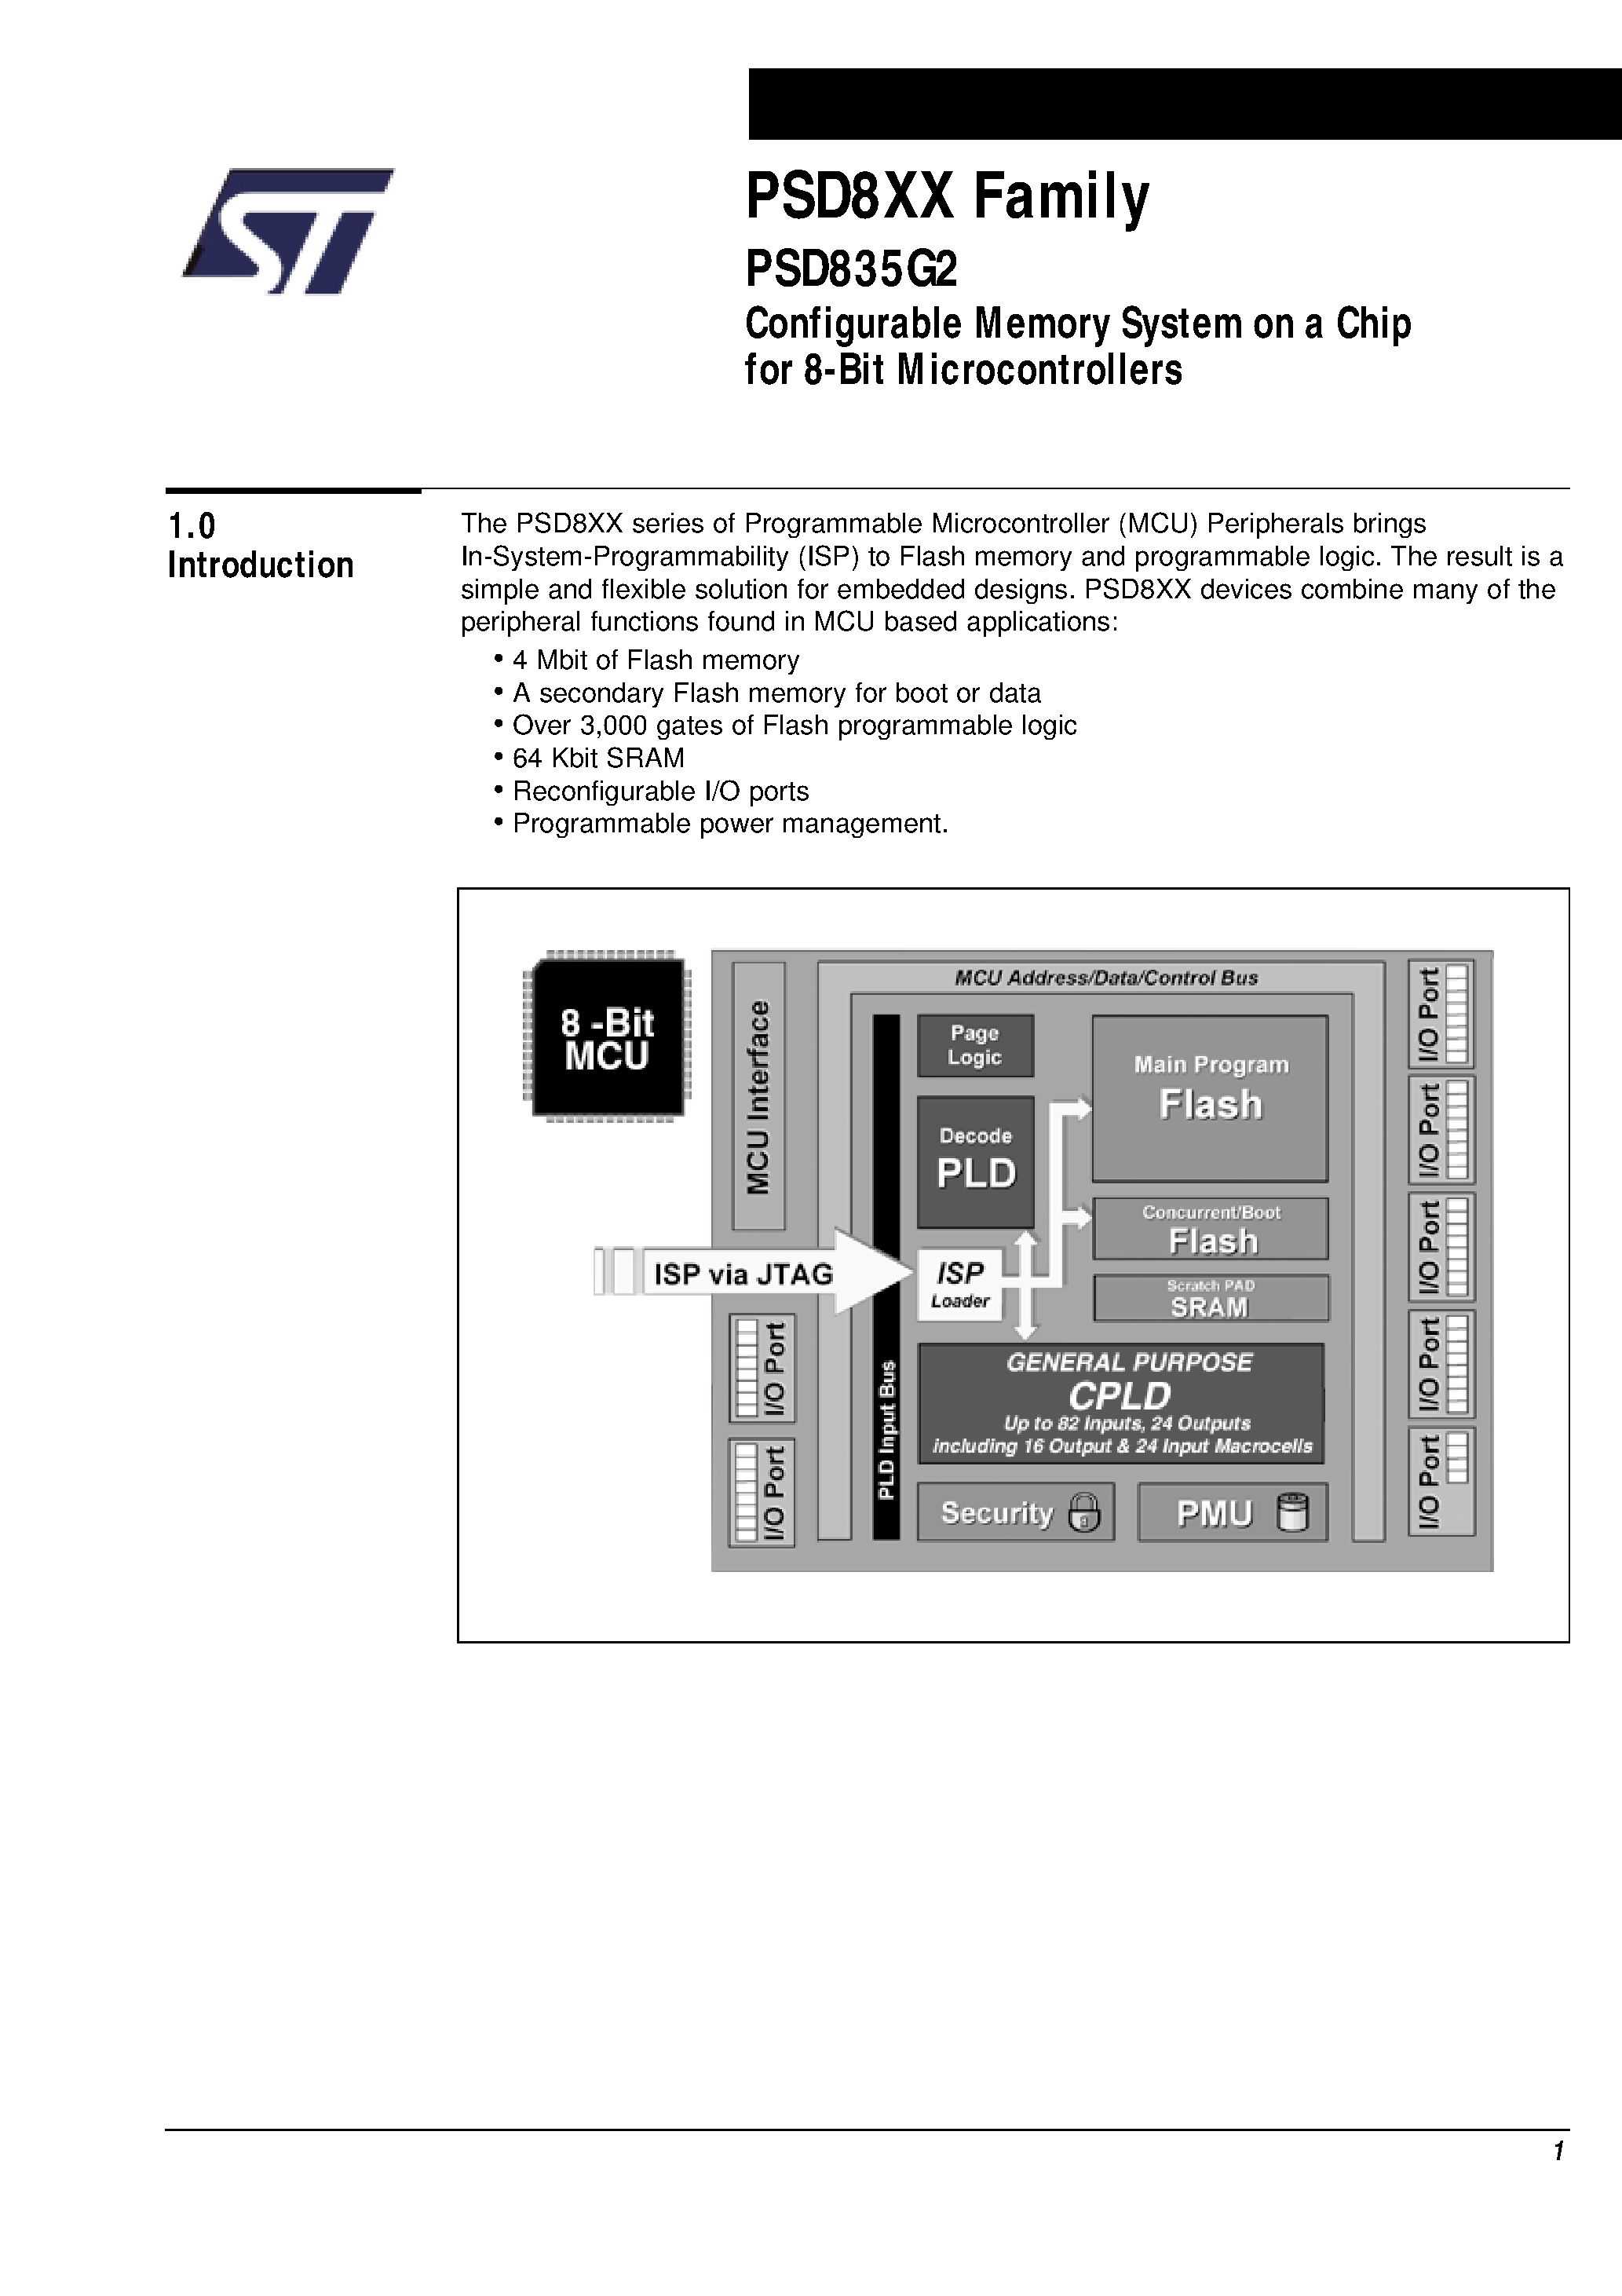 Datasheet PSD835F2V-A-12B81 - Configurable Memory System on a Chip for 8-Bit Microcontrollers page 2